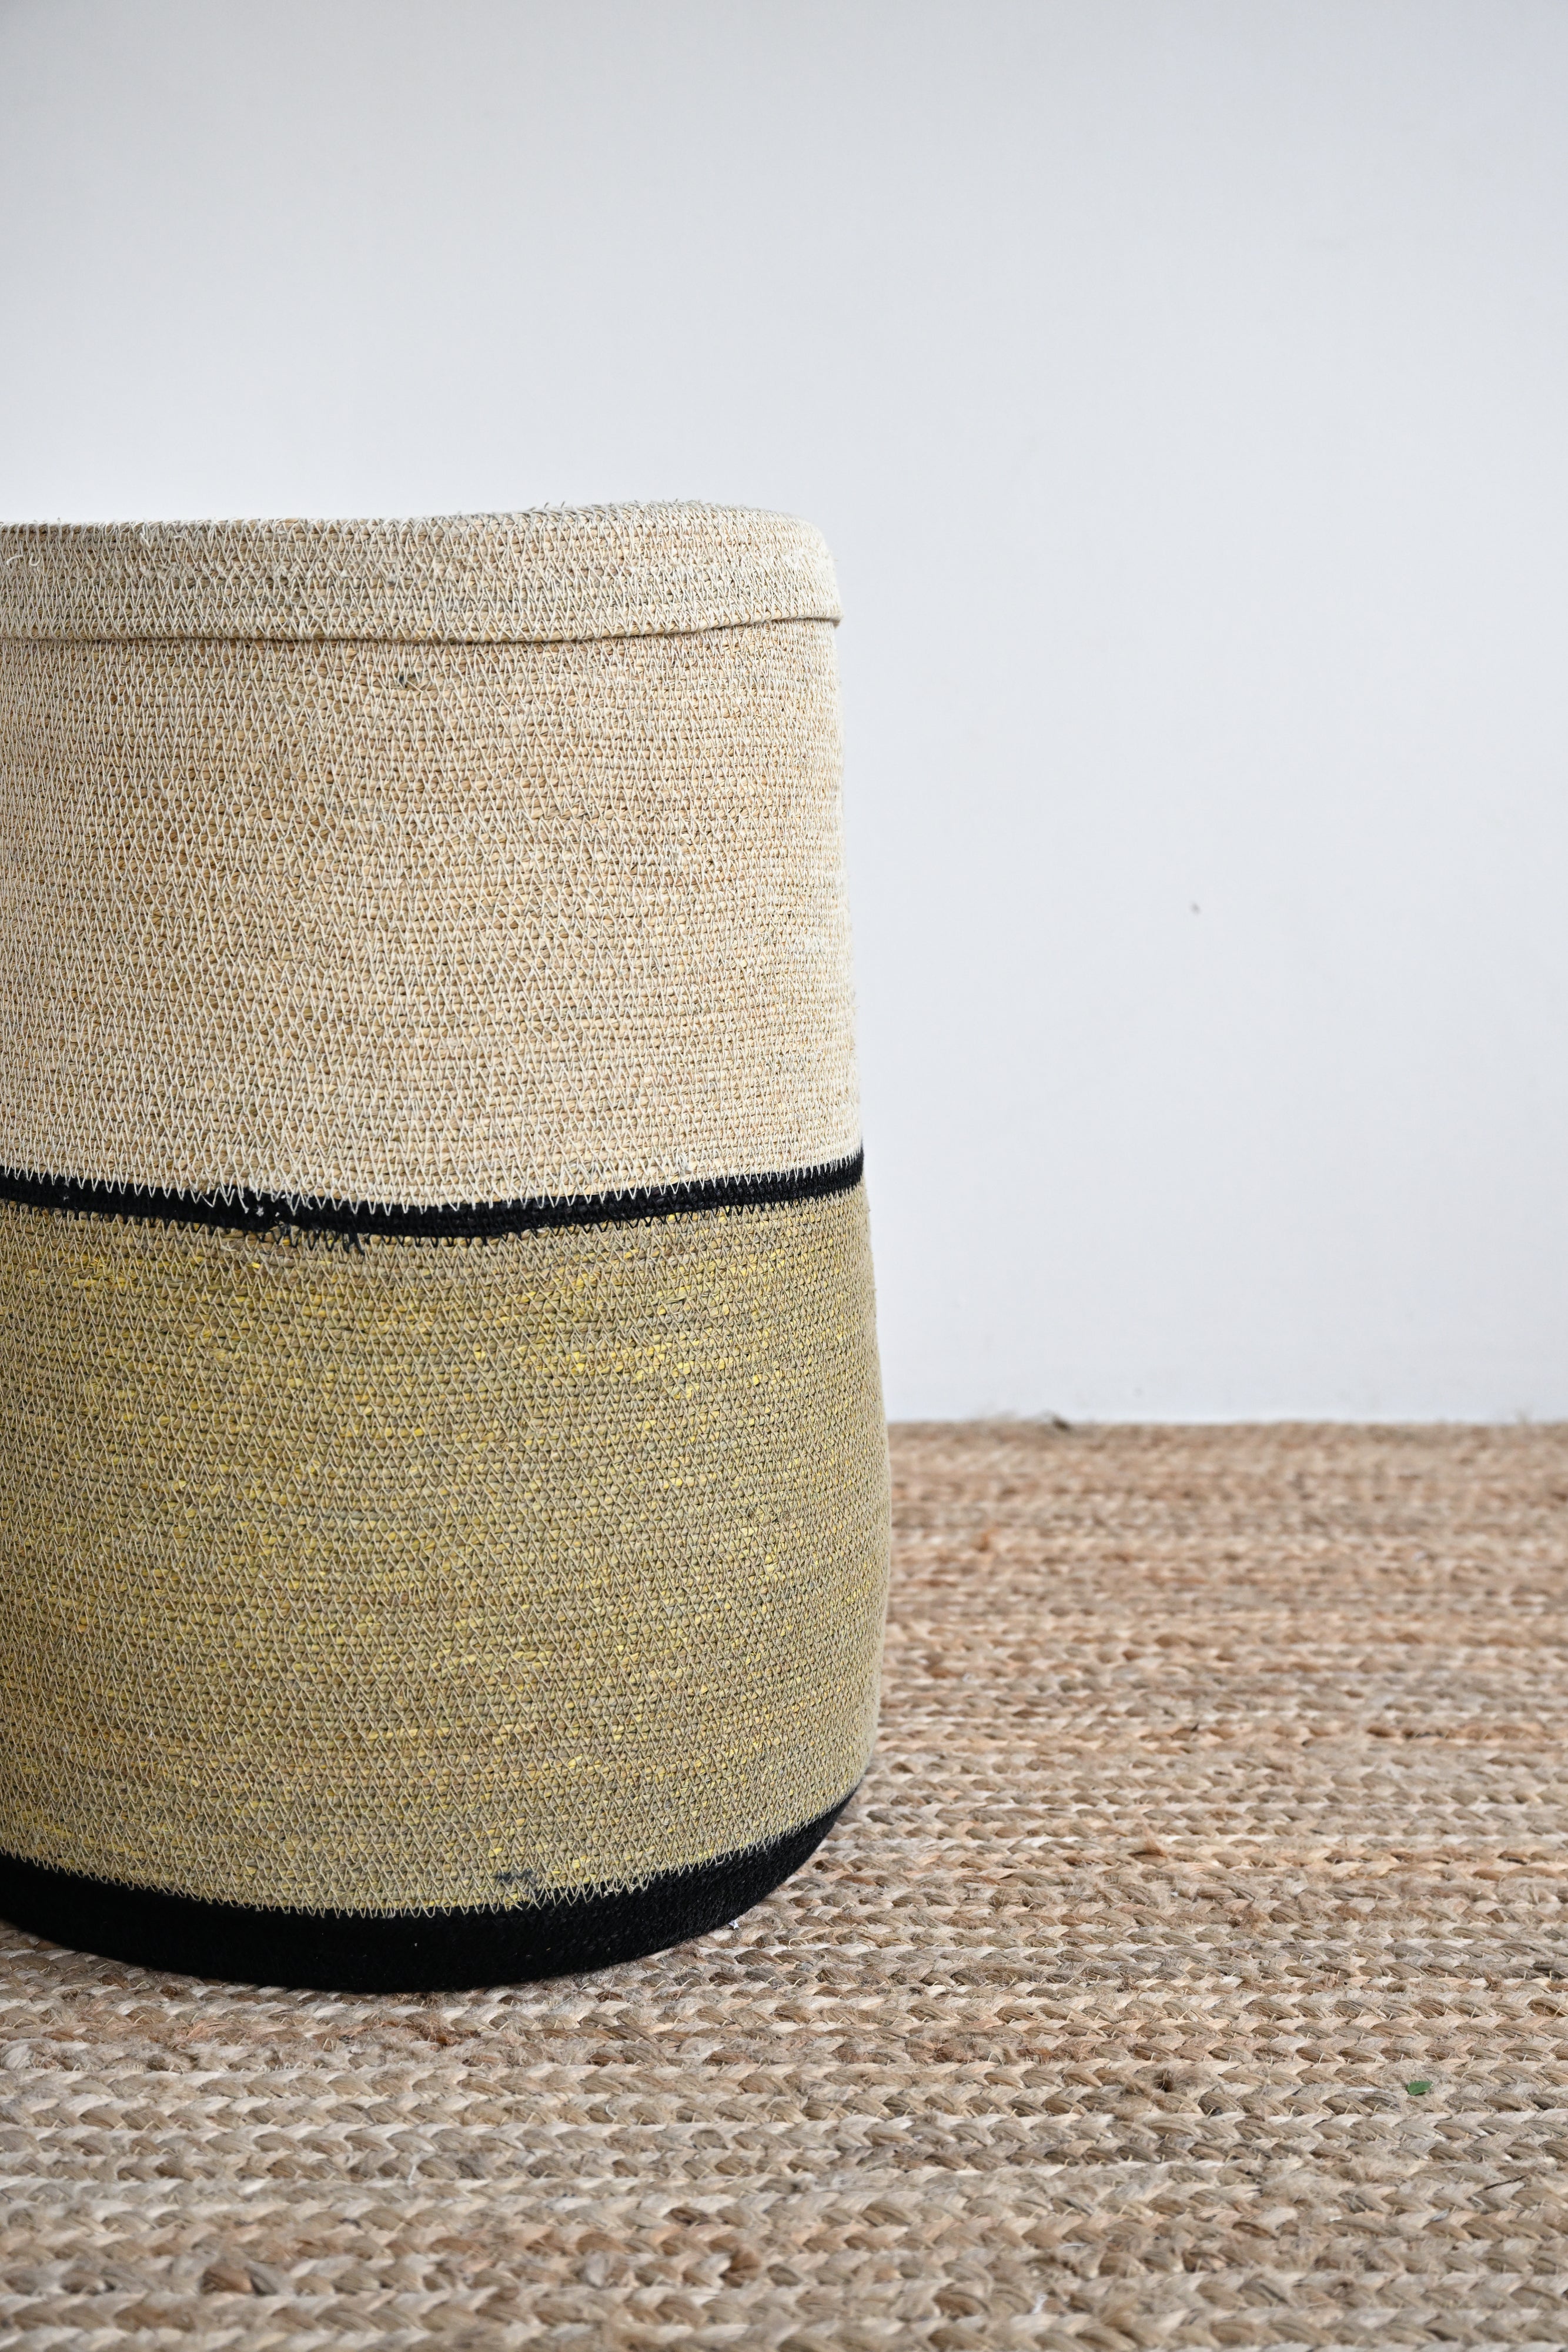 Cairo Woven Basket with Lid